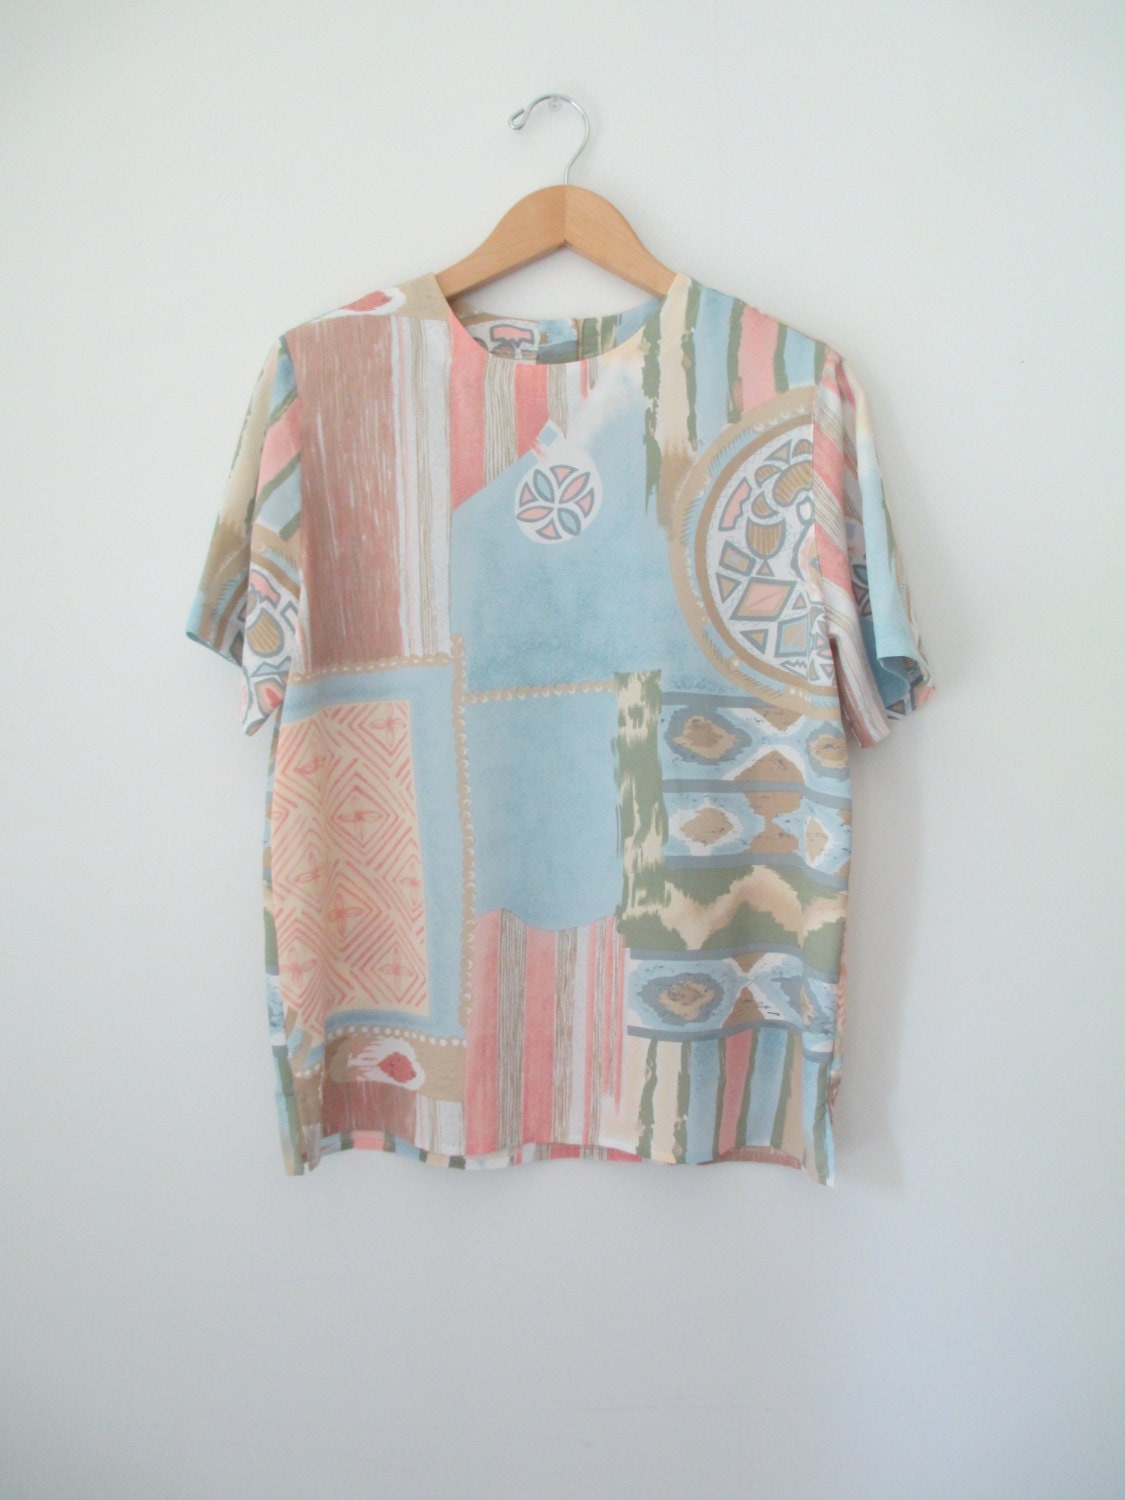 Vtg 90s Blouse w/ Earth Tones SW Print - LucyBlueVintage